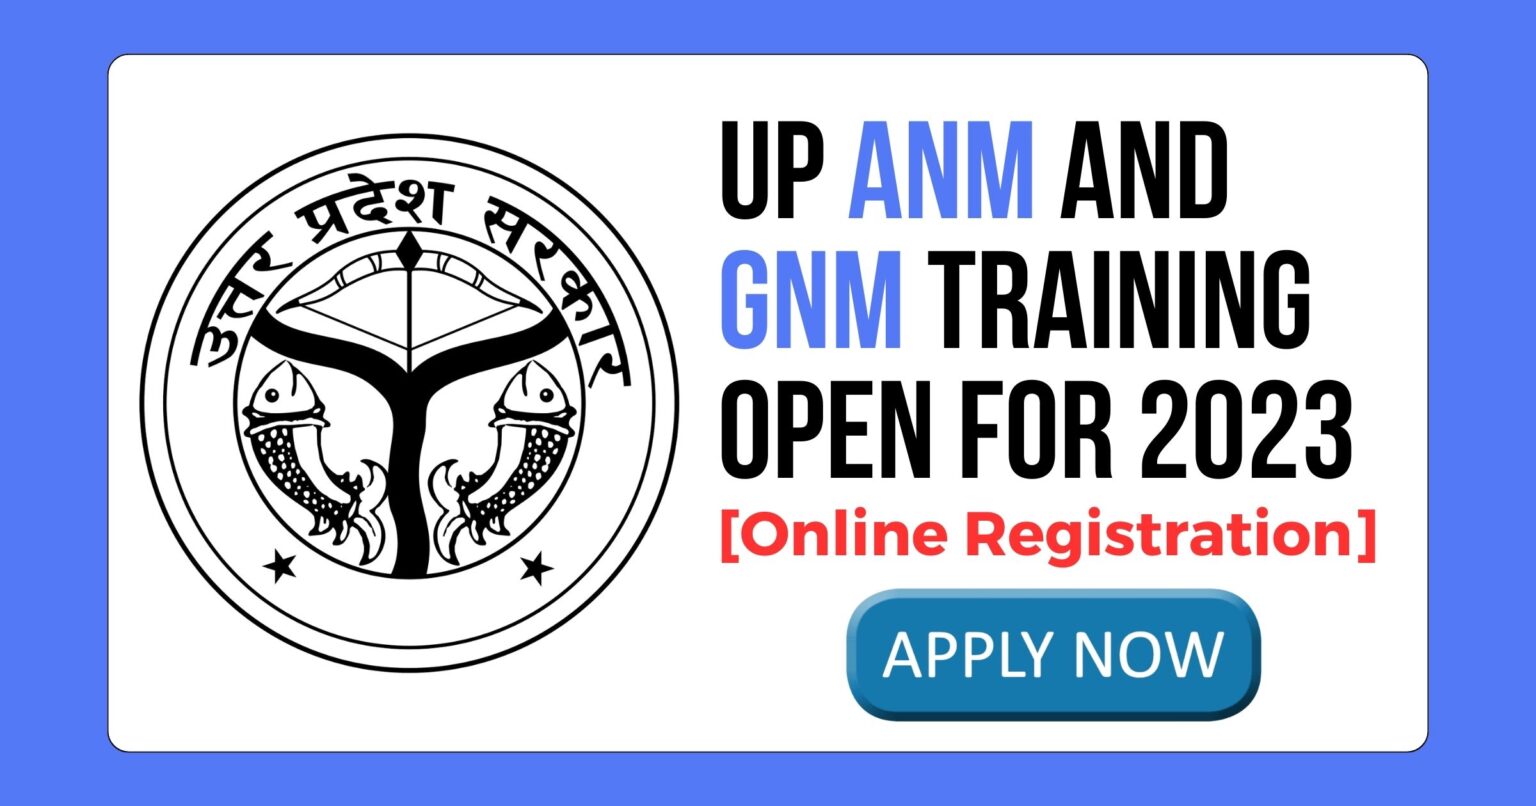 [Online Registration] UP ANM and GNM Training Open for 2023 - Rega Academy